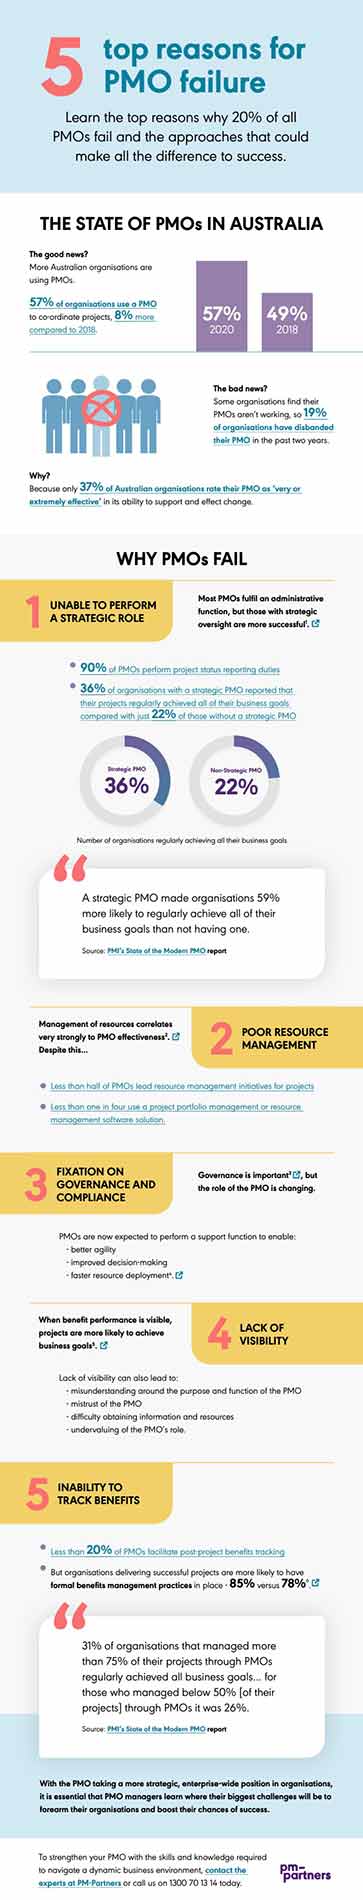 5 top reasons for PMO failure infographic